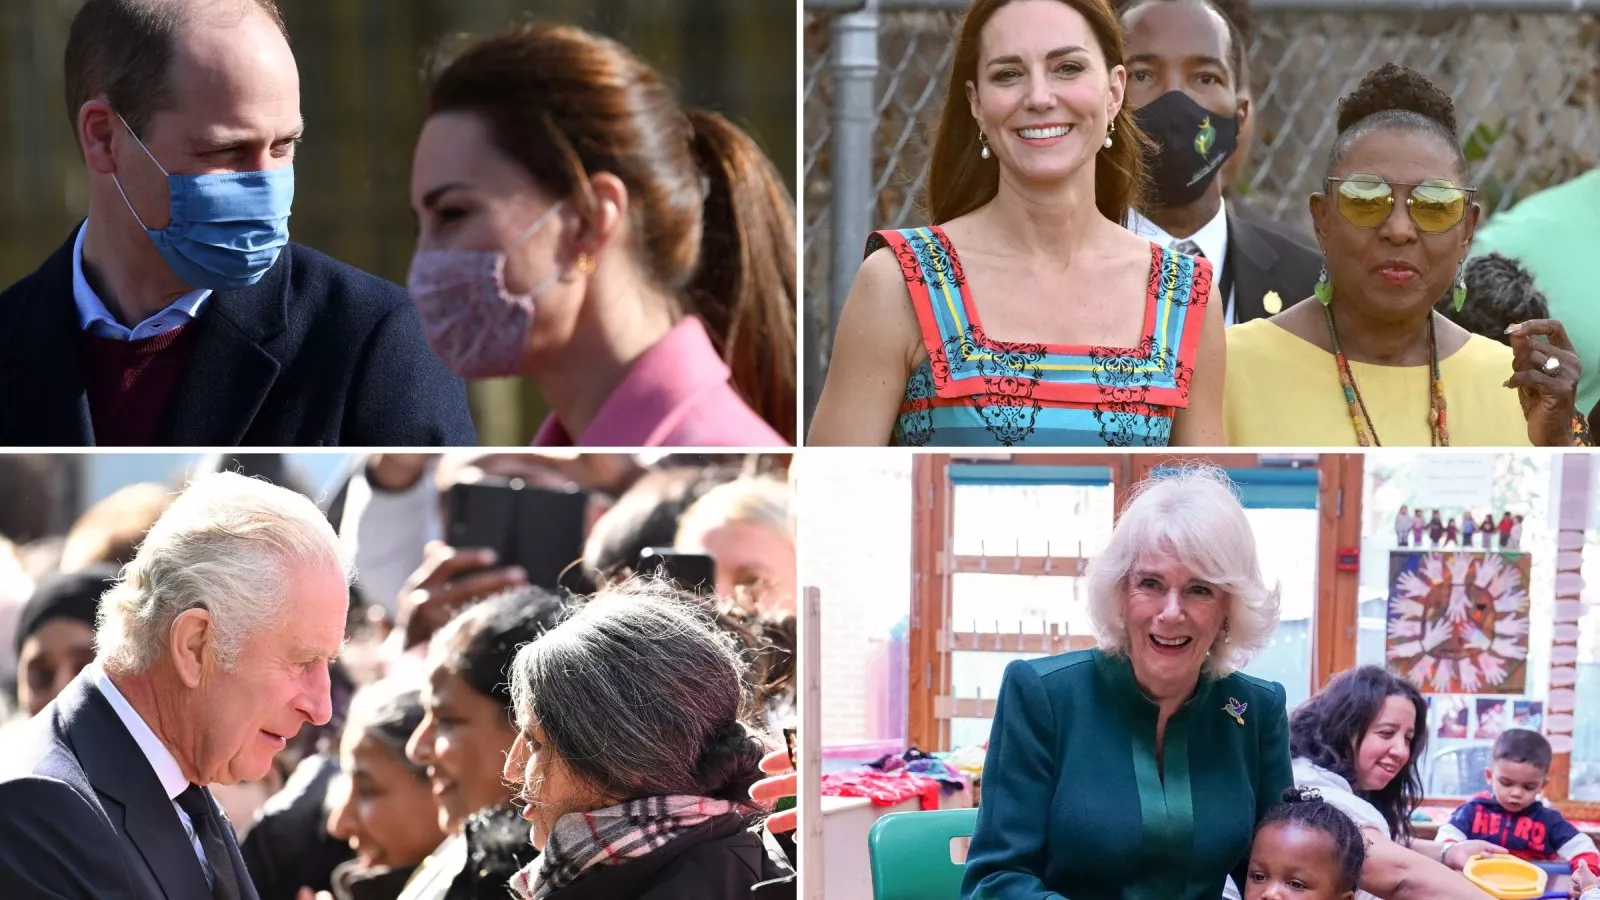 King Charles, Queen Camilla Awkward Meetings With People of Color Go Viral